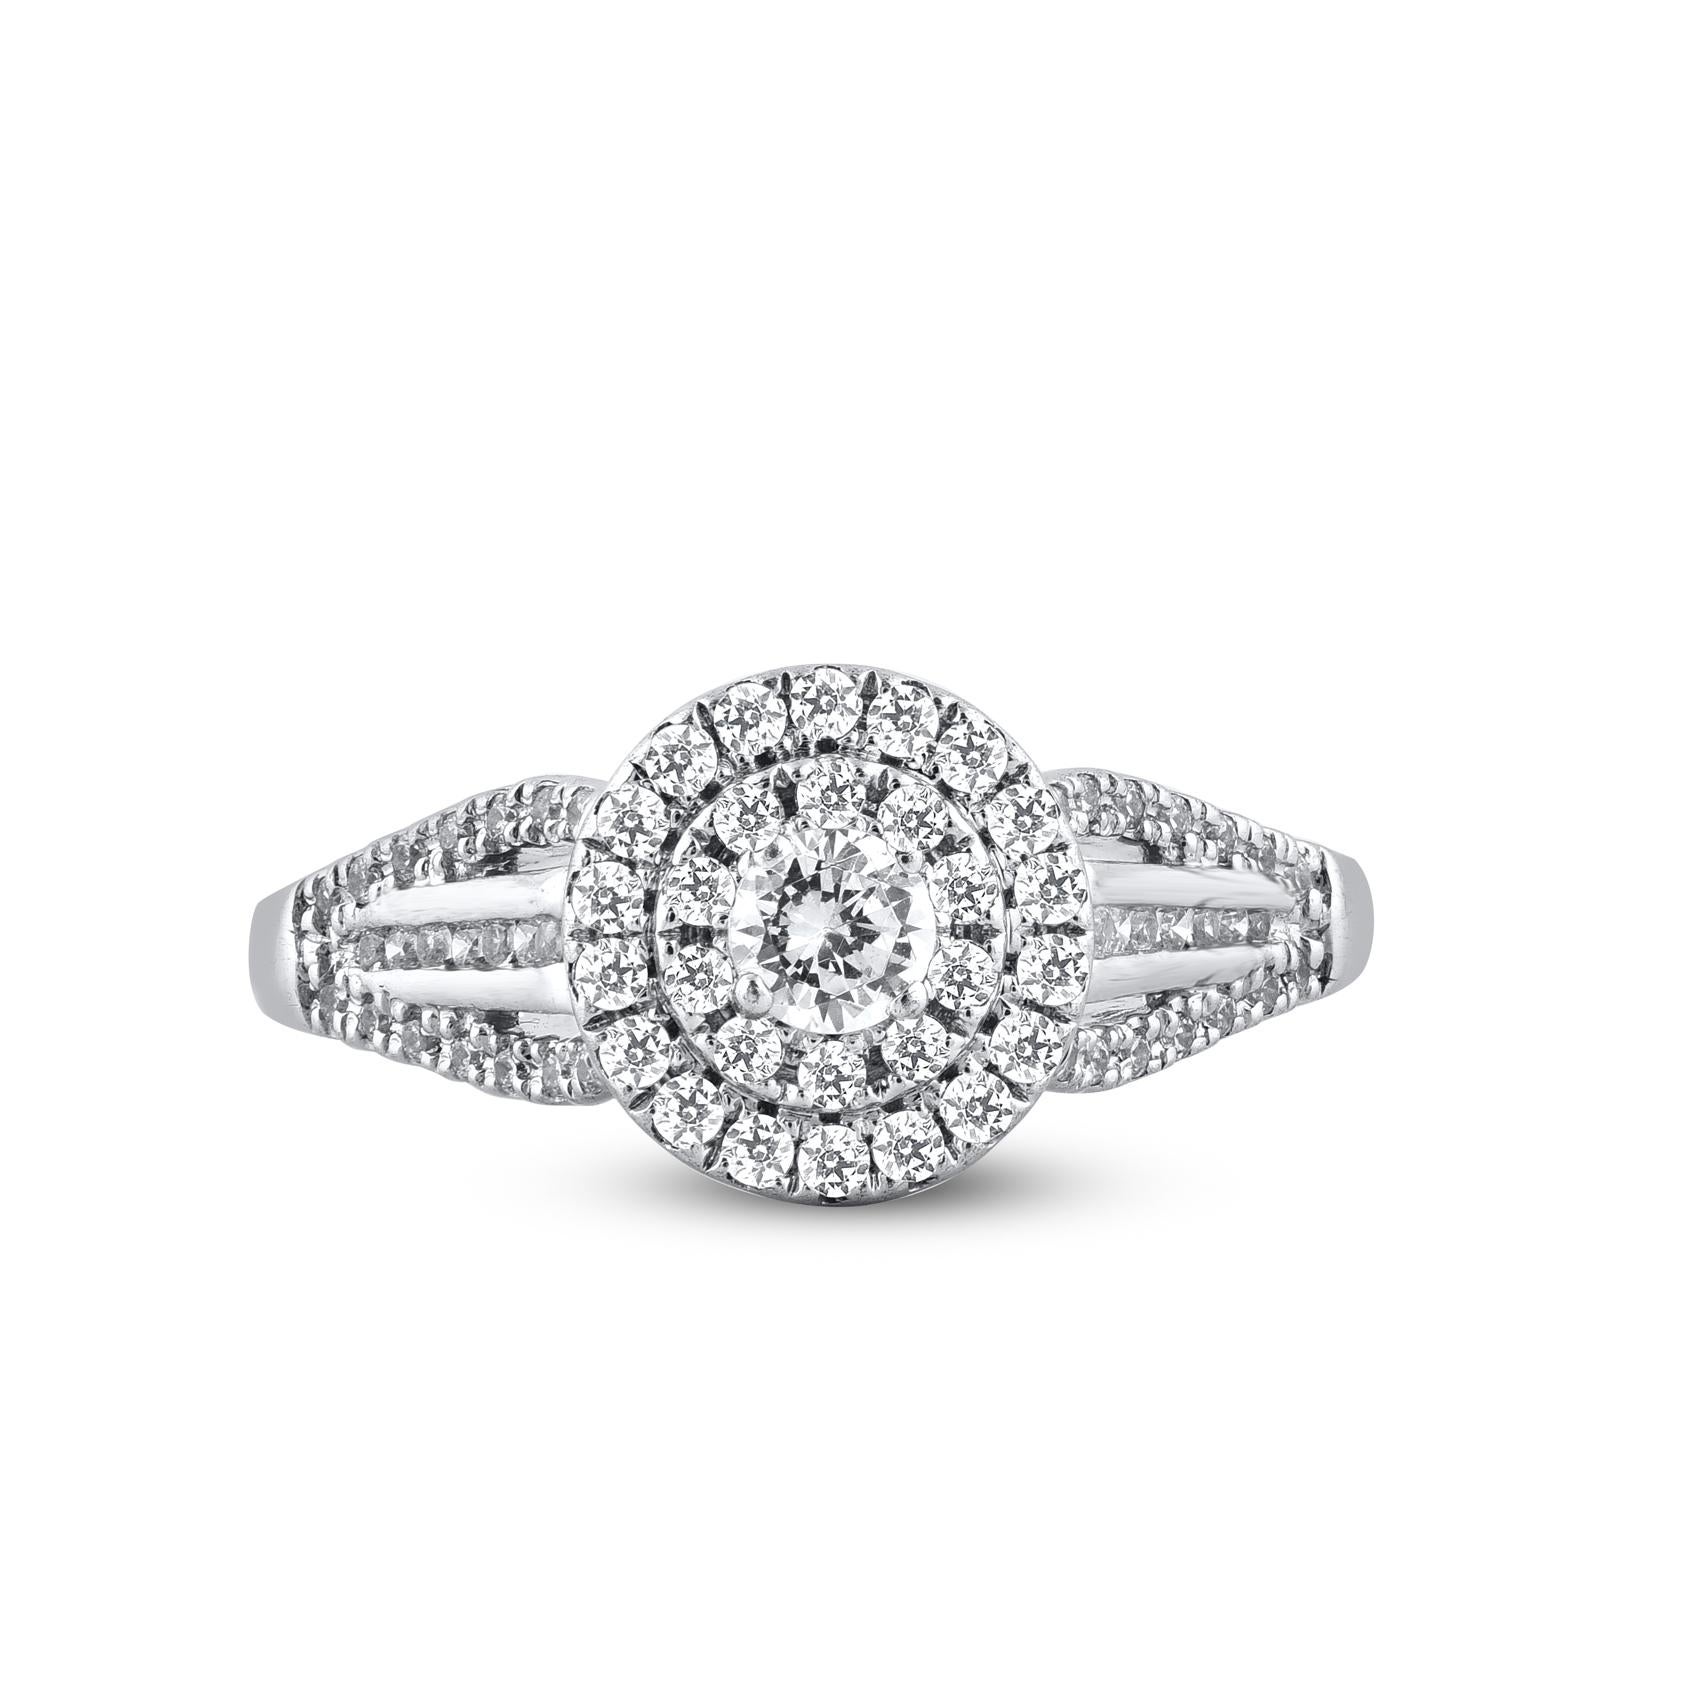 Give a touch of glamour to your fine jewelry collection with this diamond engagement ring. These diamond ring are studded with 89 single cut and brilliant cut round diamonds in pave, prong & channel setting and crafted in 14kt white gold. The white